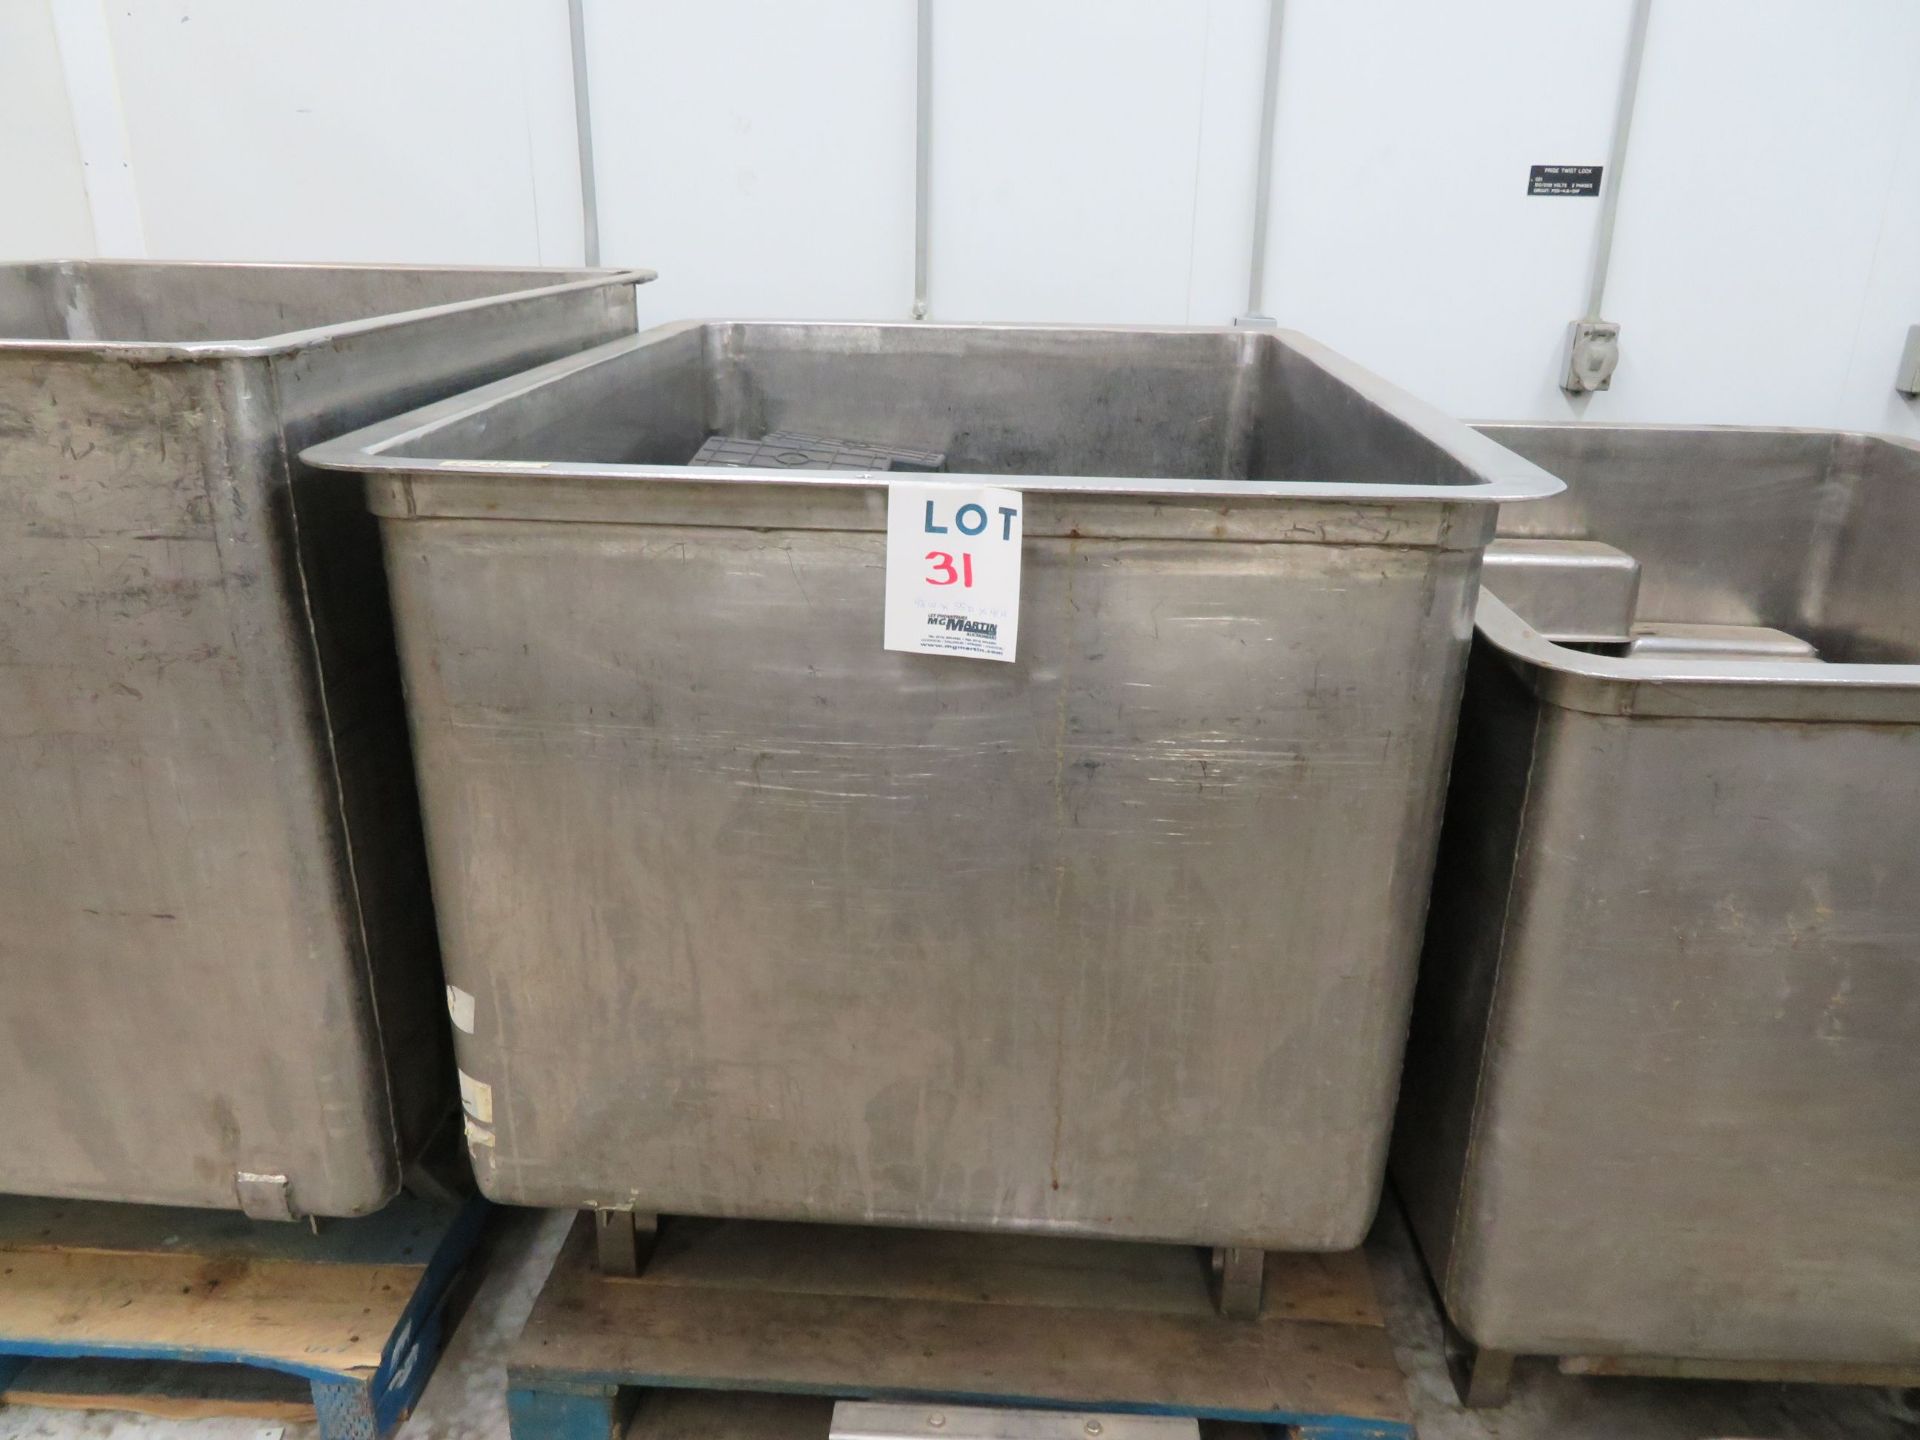 Stainless steel tub approx. 42"w x 55"d x 41"h